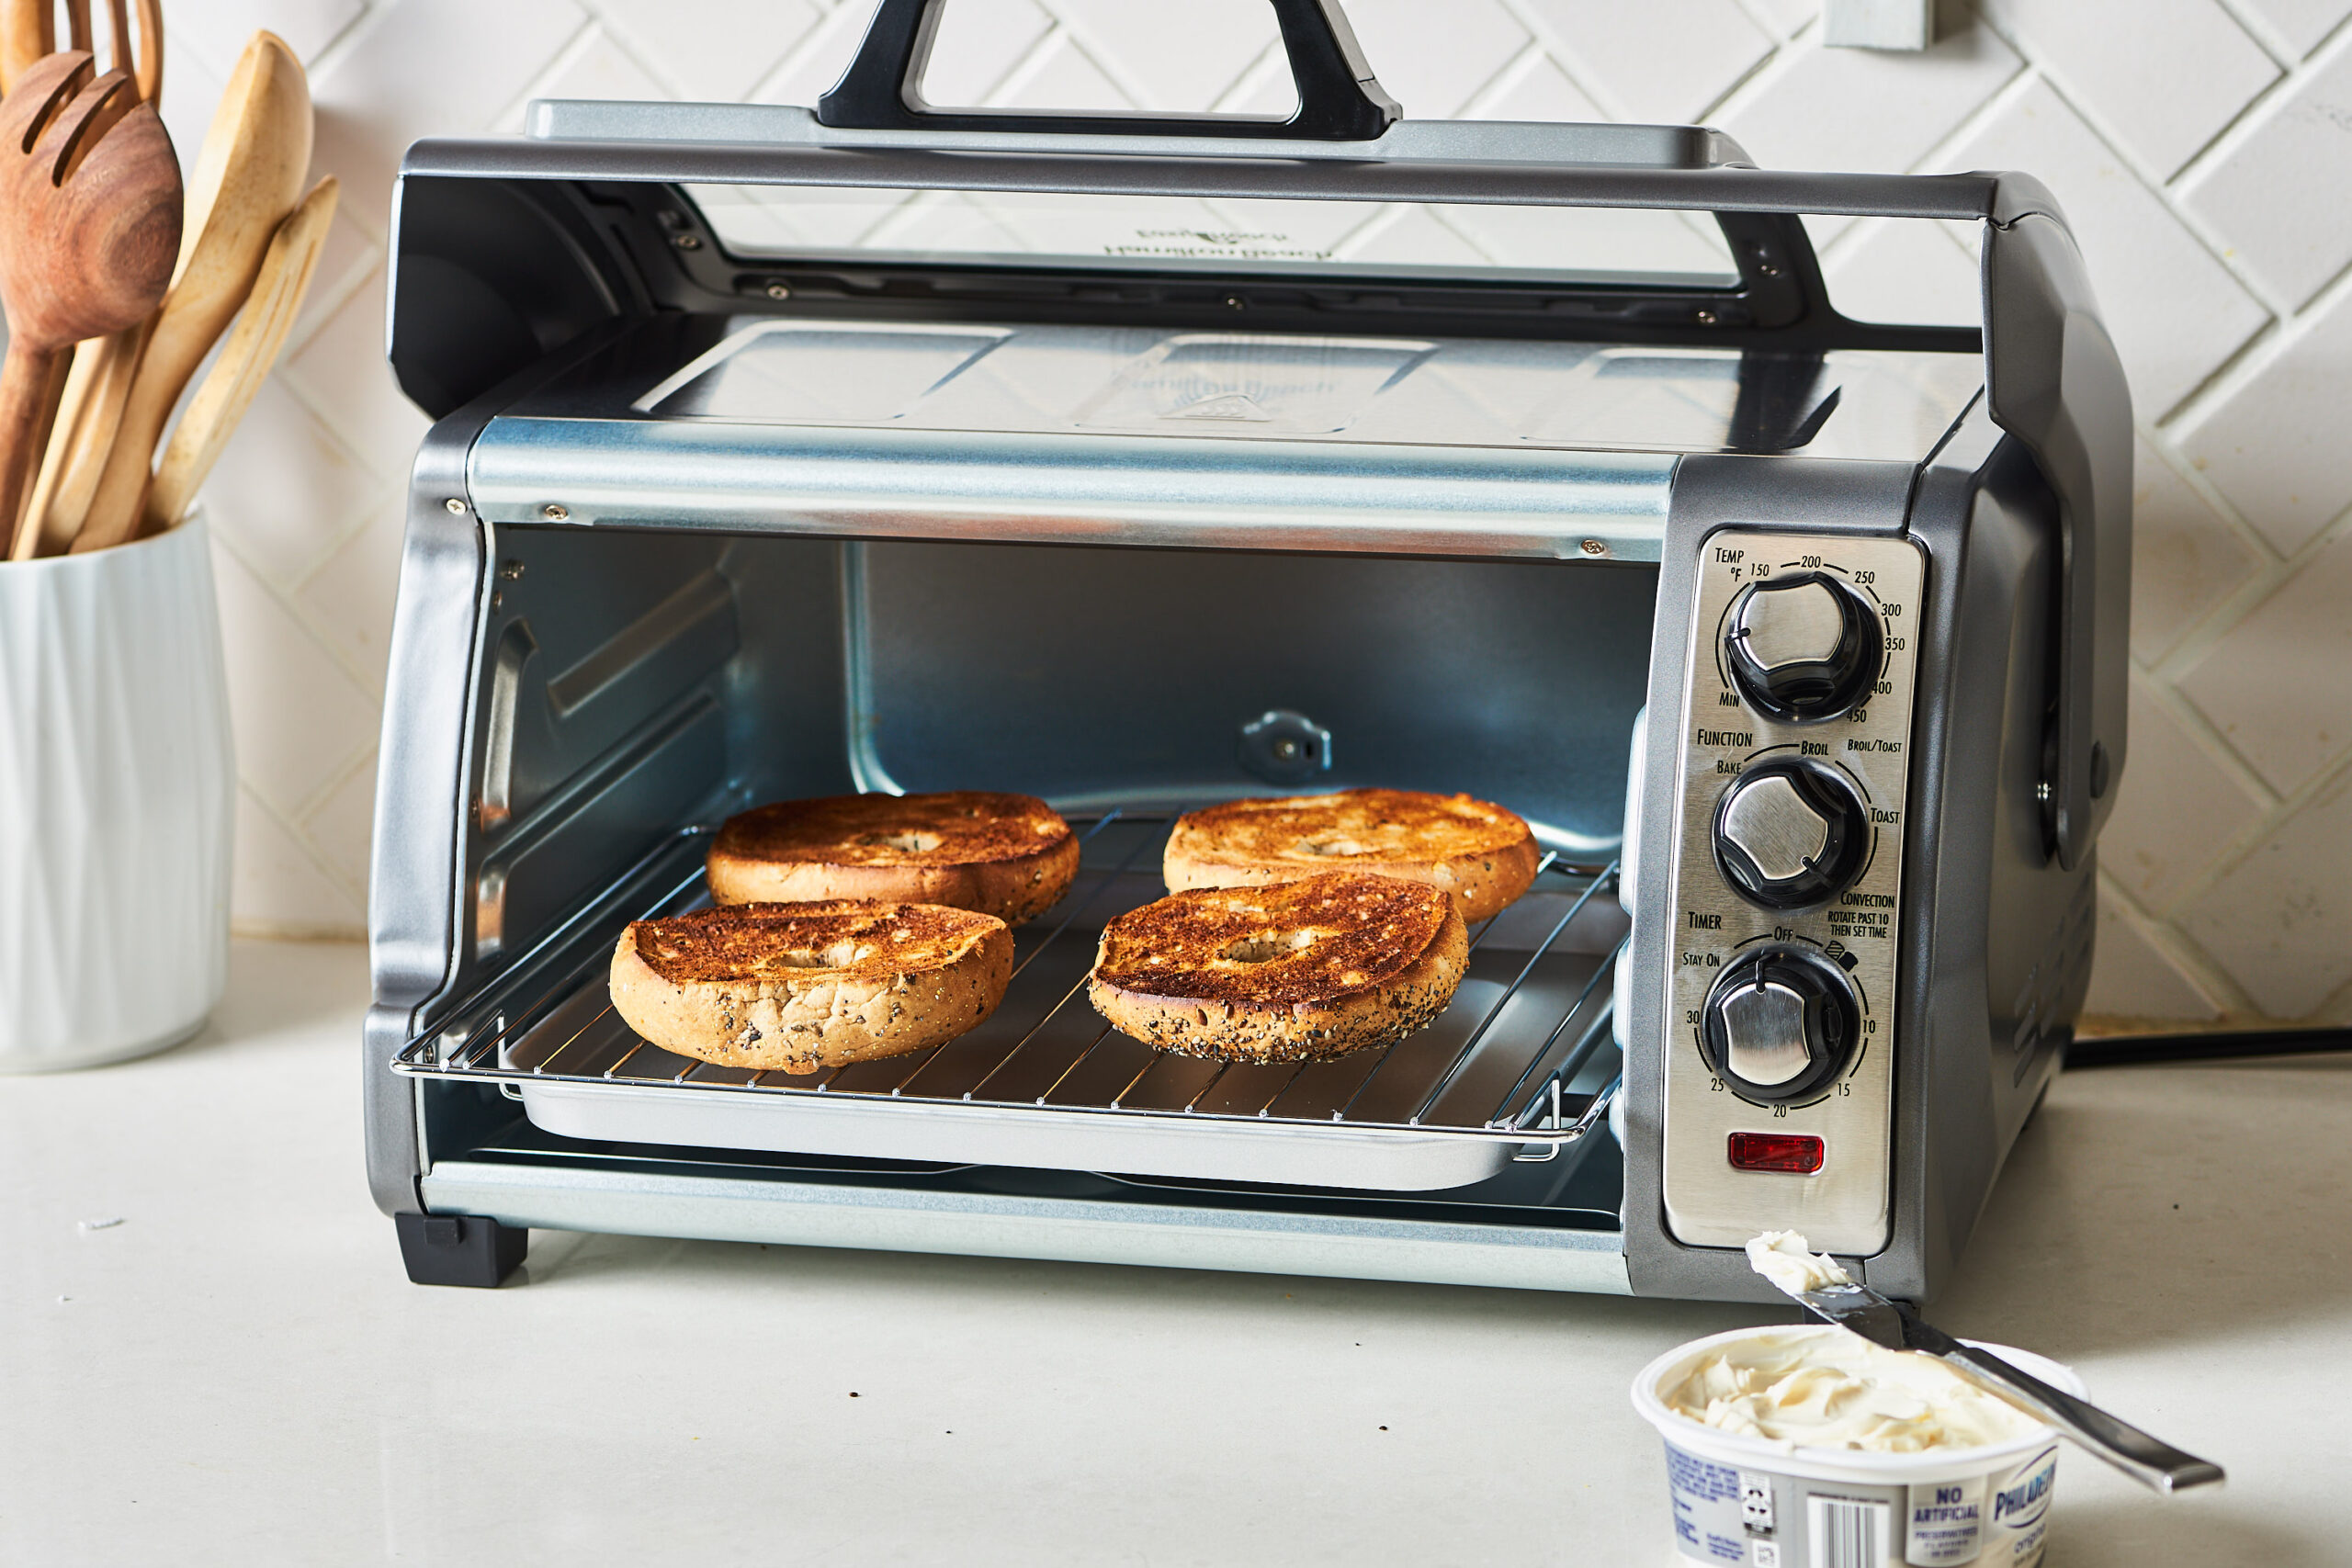 Best Toaster Oven under $50 - Review and Buyer's Guide [Feb 2022]